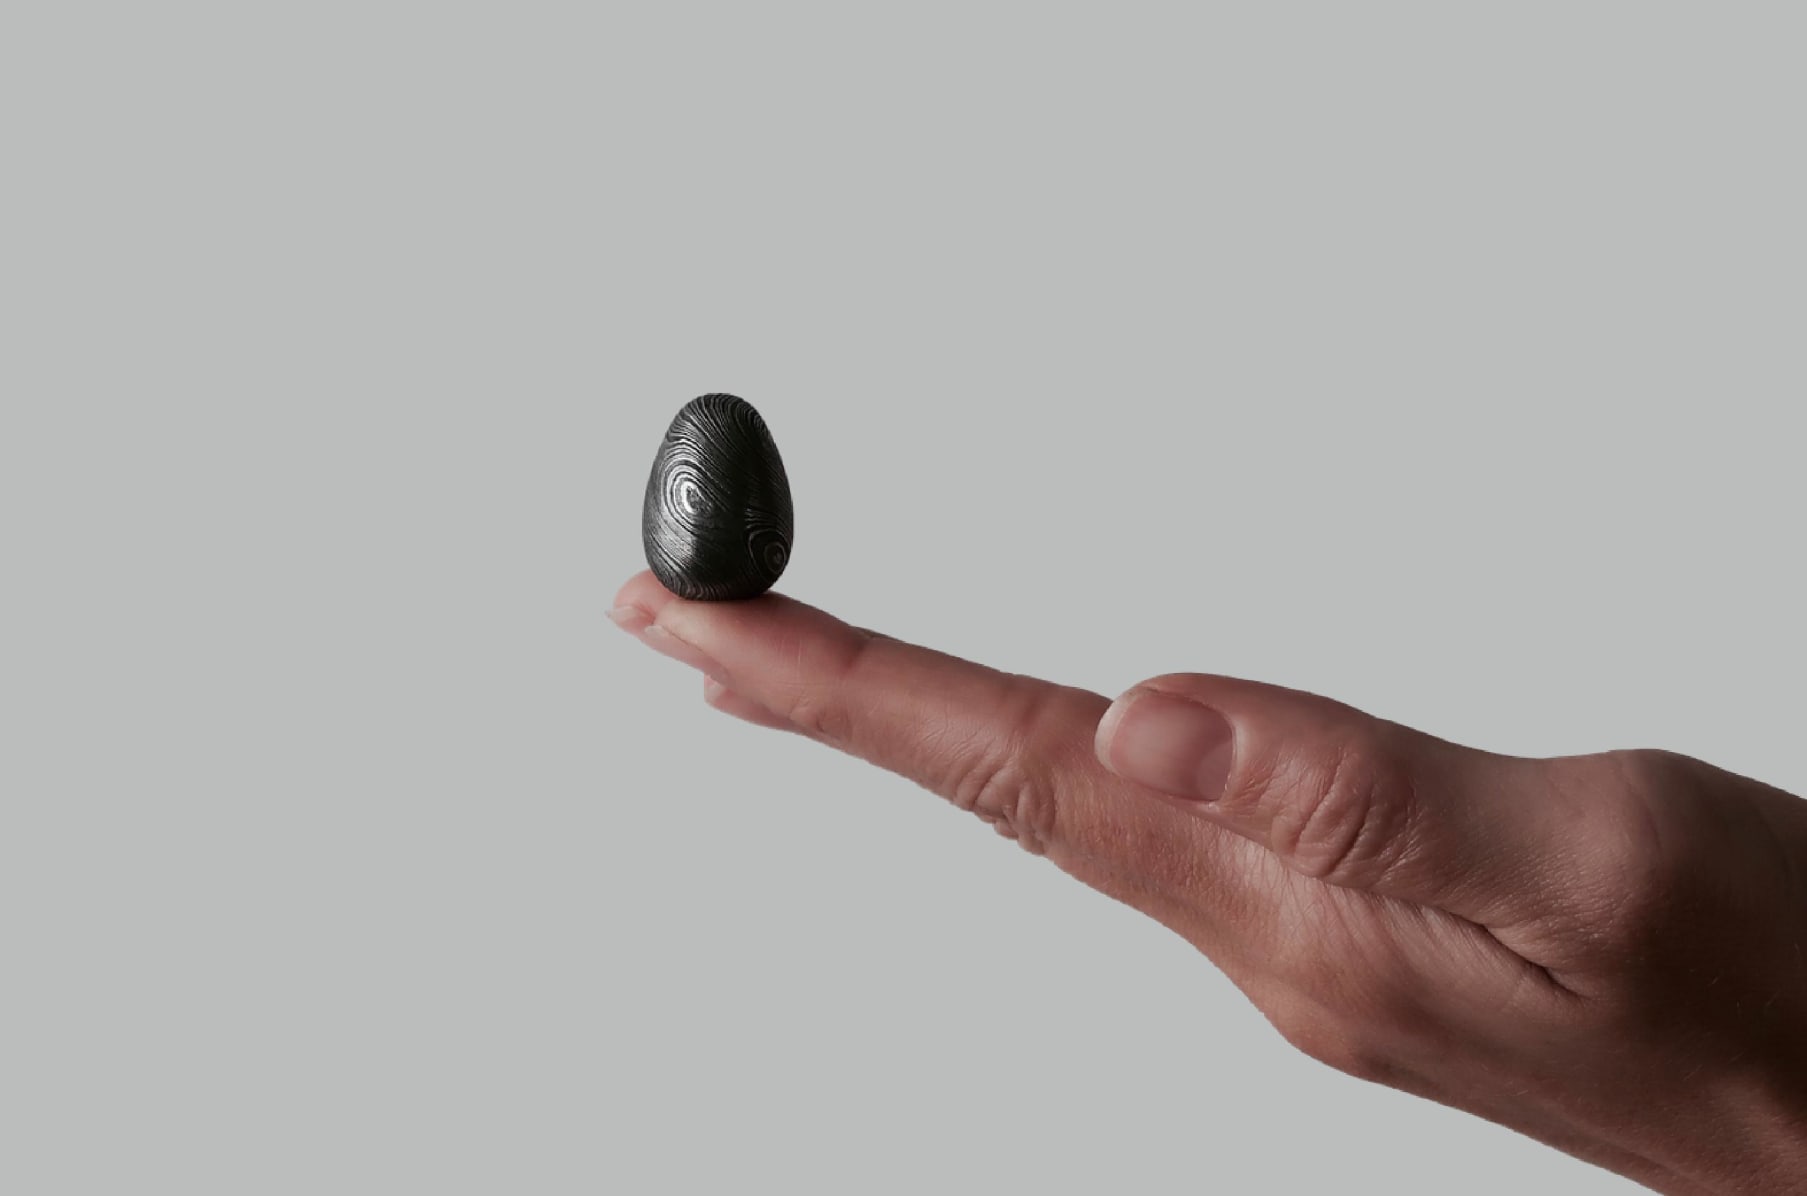 ORIJIN DESIGN COMPANY - When we launched the Thinking Egg II earlier this  year we had no idea more than 7,000 customers from across the globe wanted  to hold what we designed